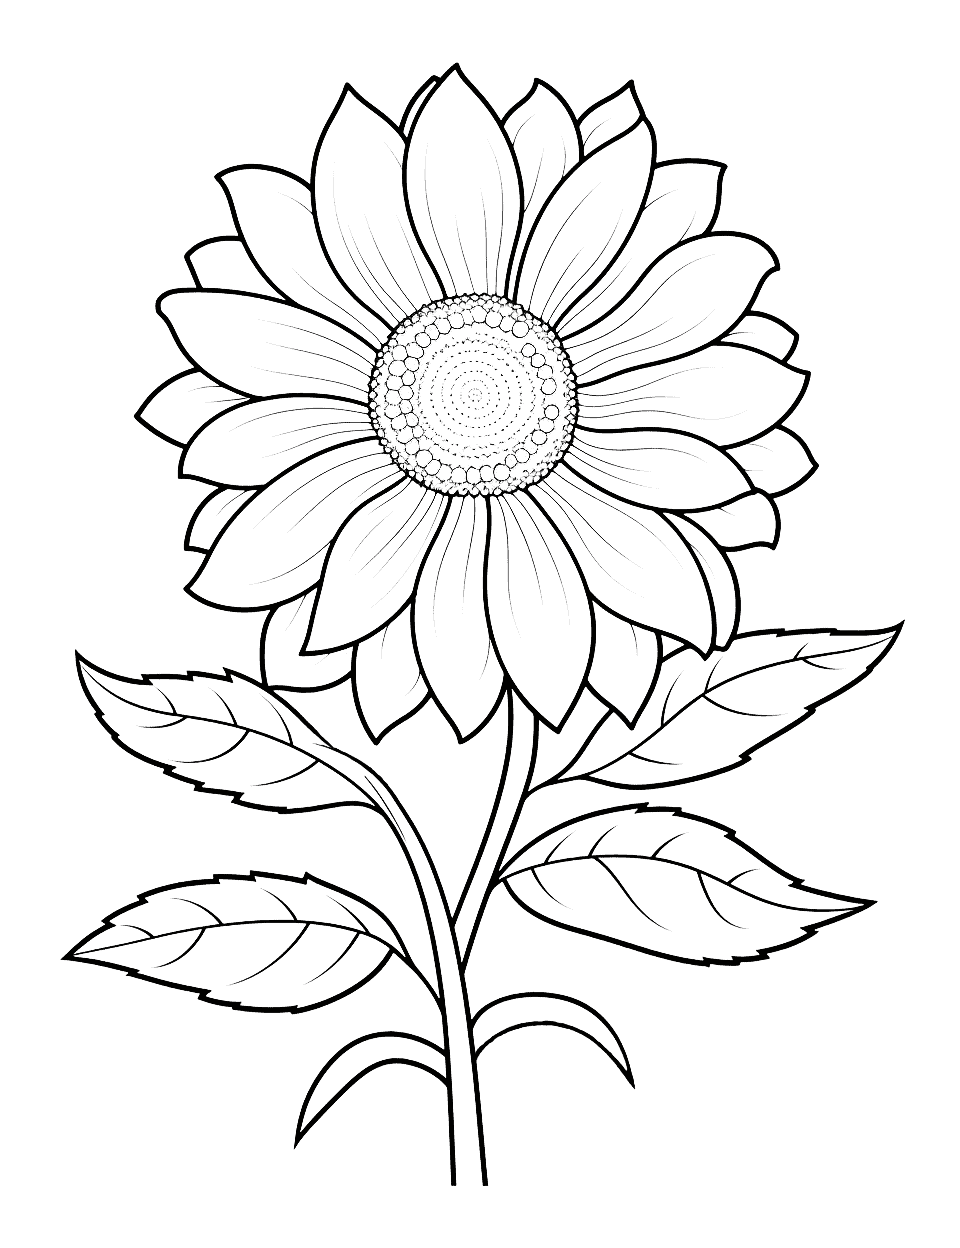 Cool and Realistic Sunflower Flower Coloring Page - An advanced coloring page featuring a cool, realistic sunflower.